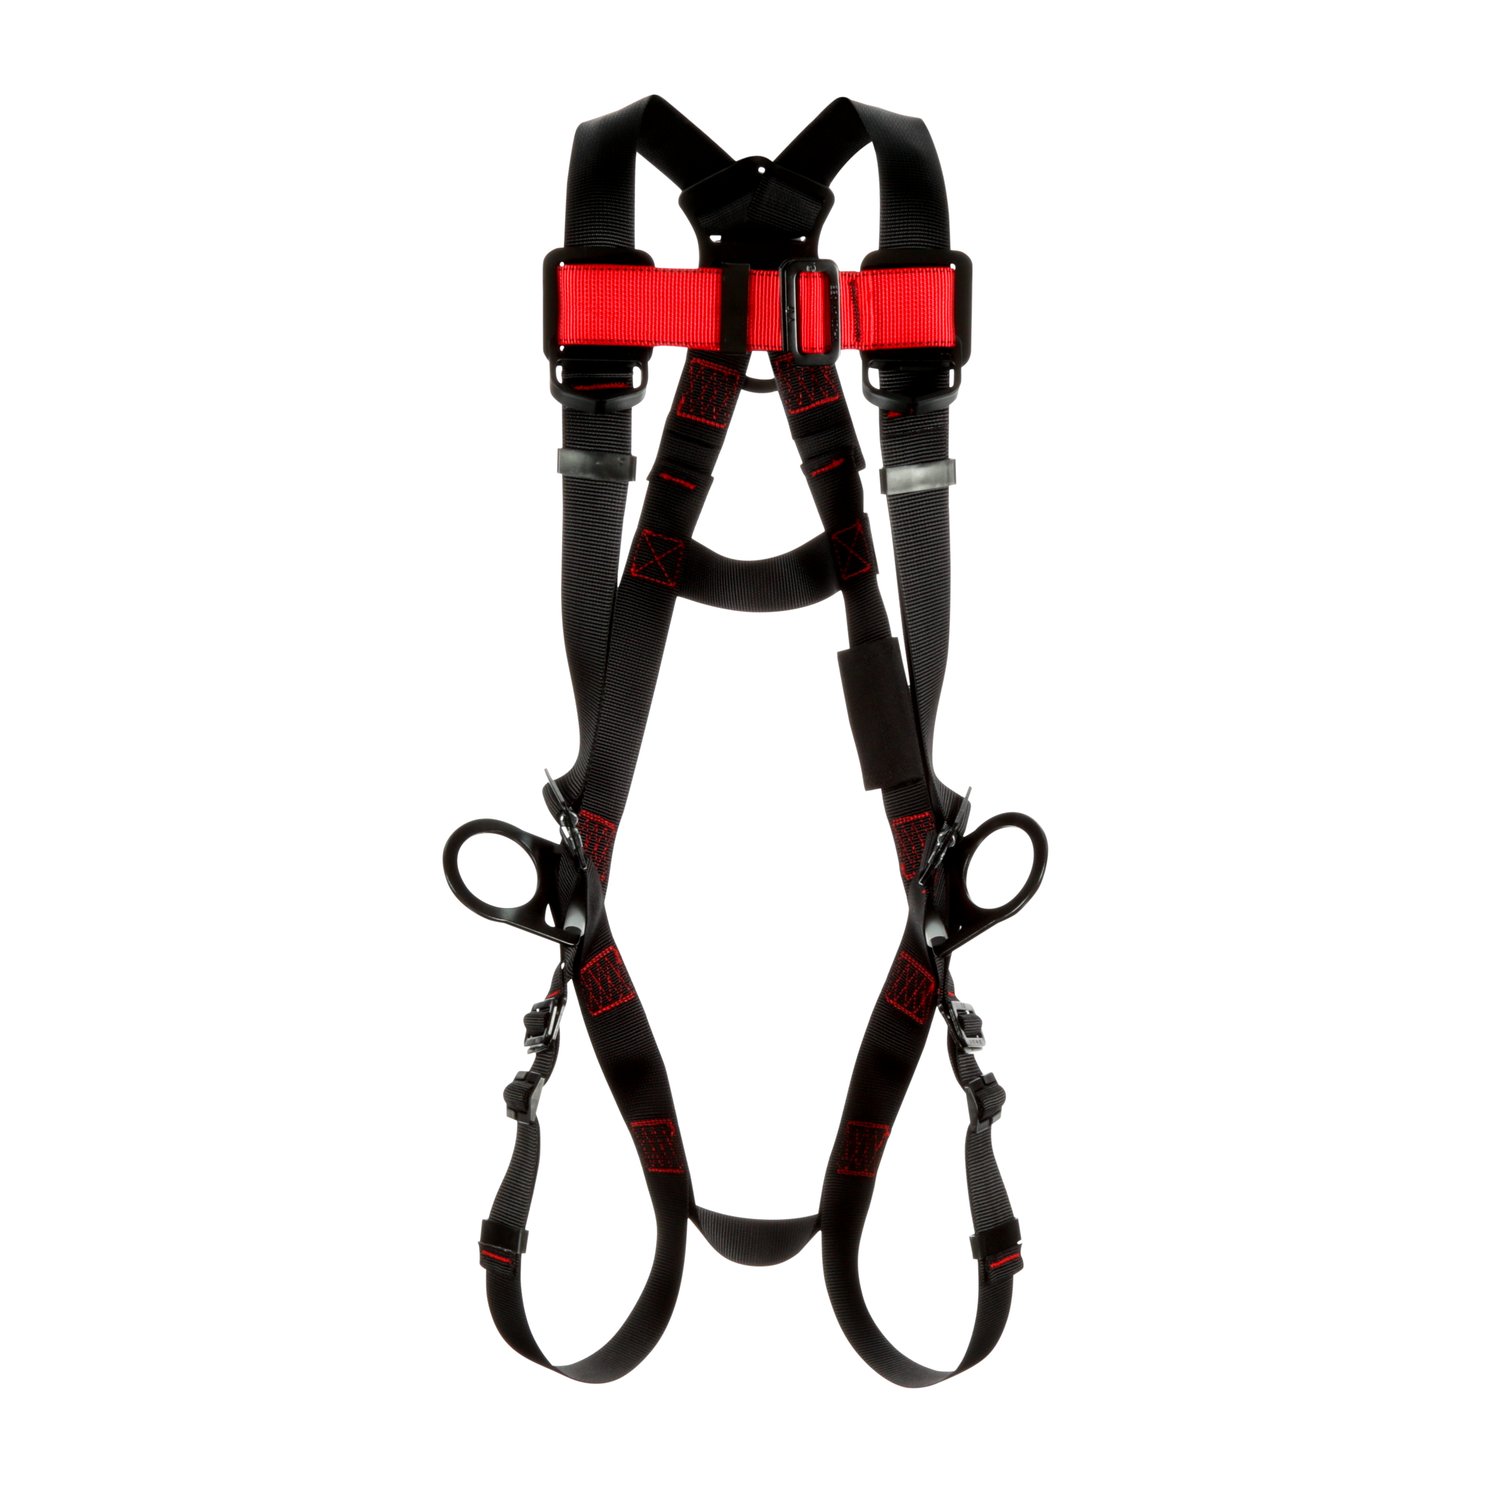 7012816839 - 3M Protecta P200 Vest Positioning Safety Harness 1161562, 2X